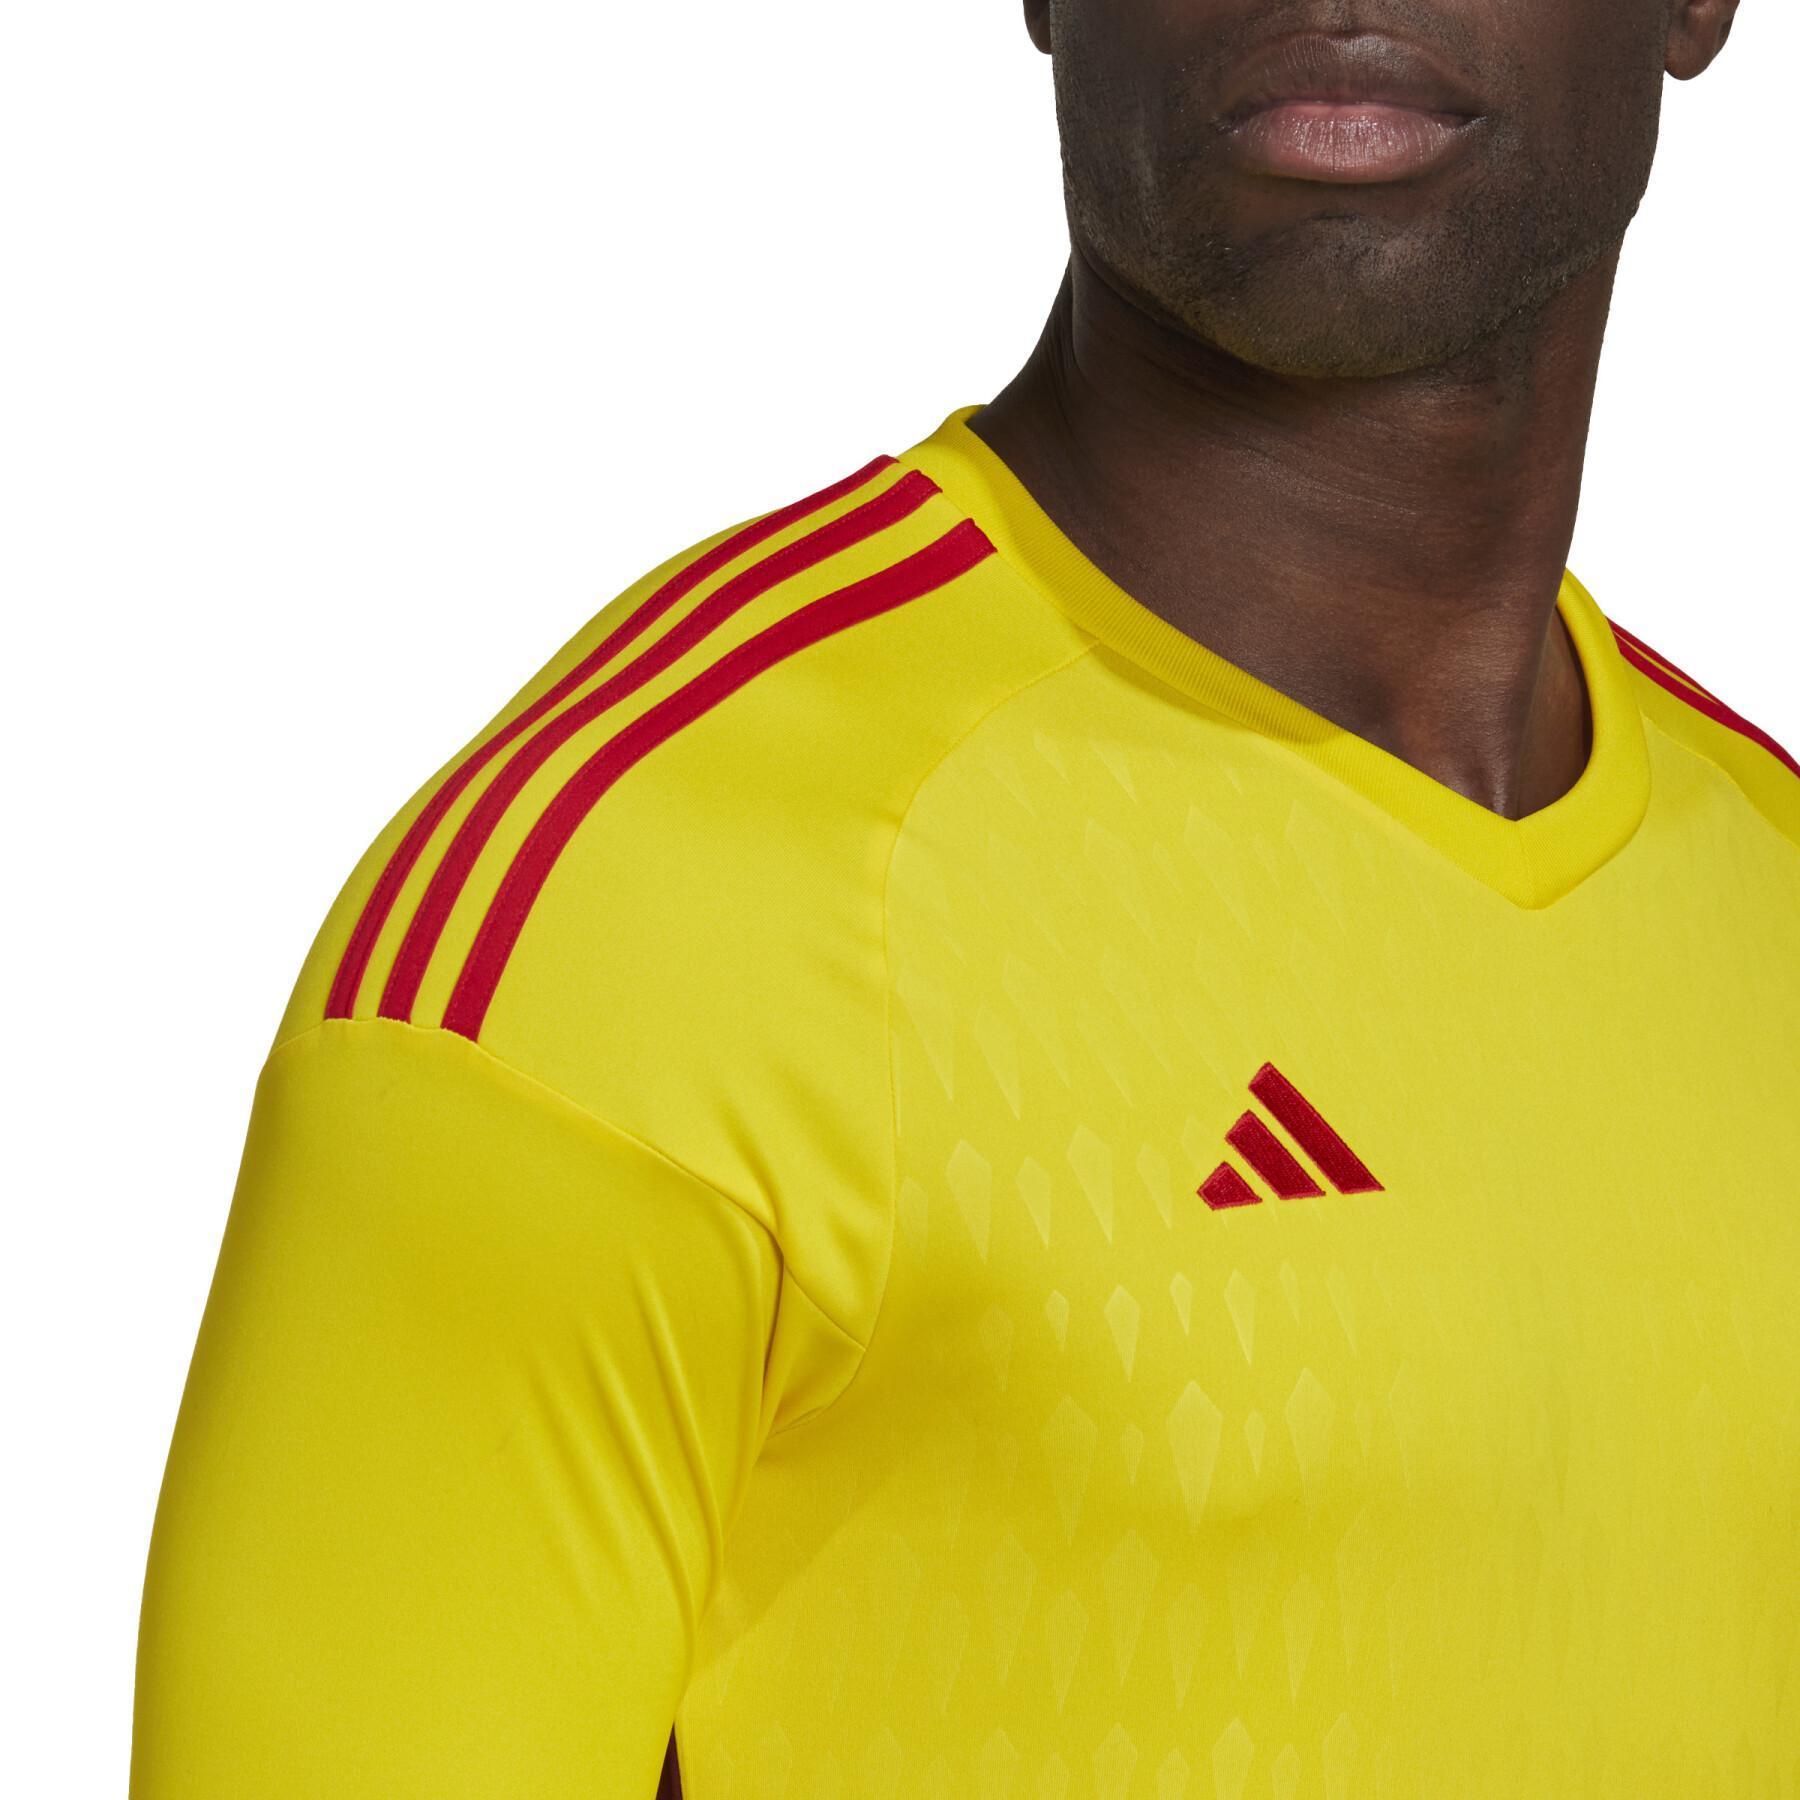 Maillot Gardien manches longues adidas Tiro 23 Competition